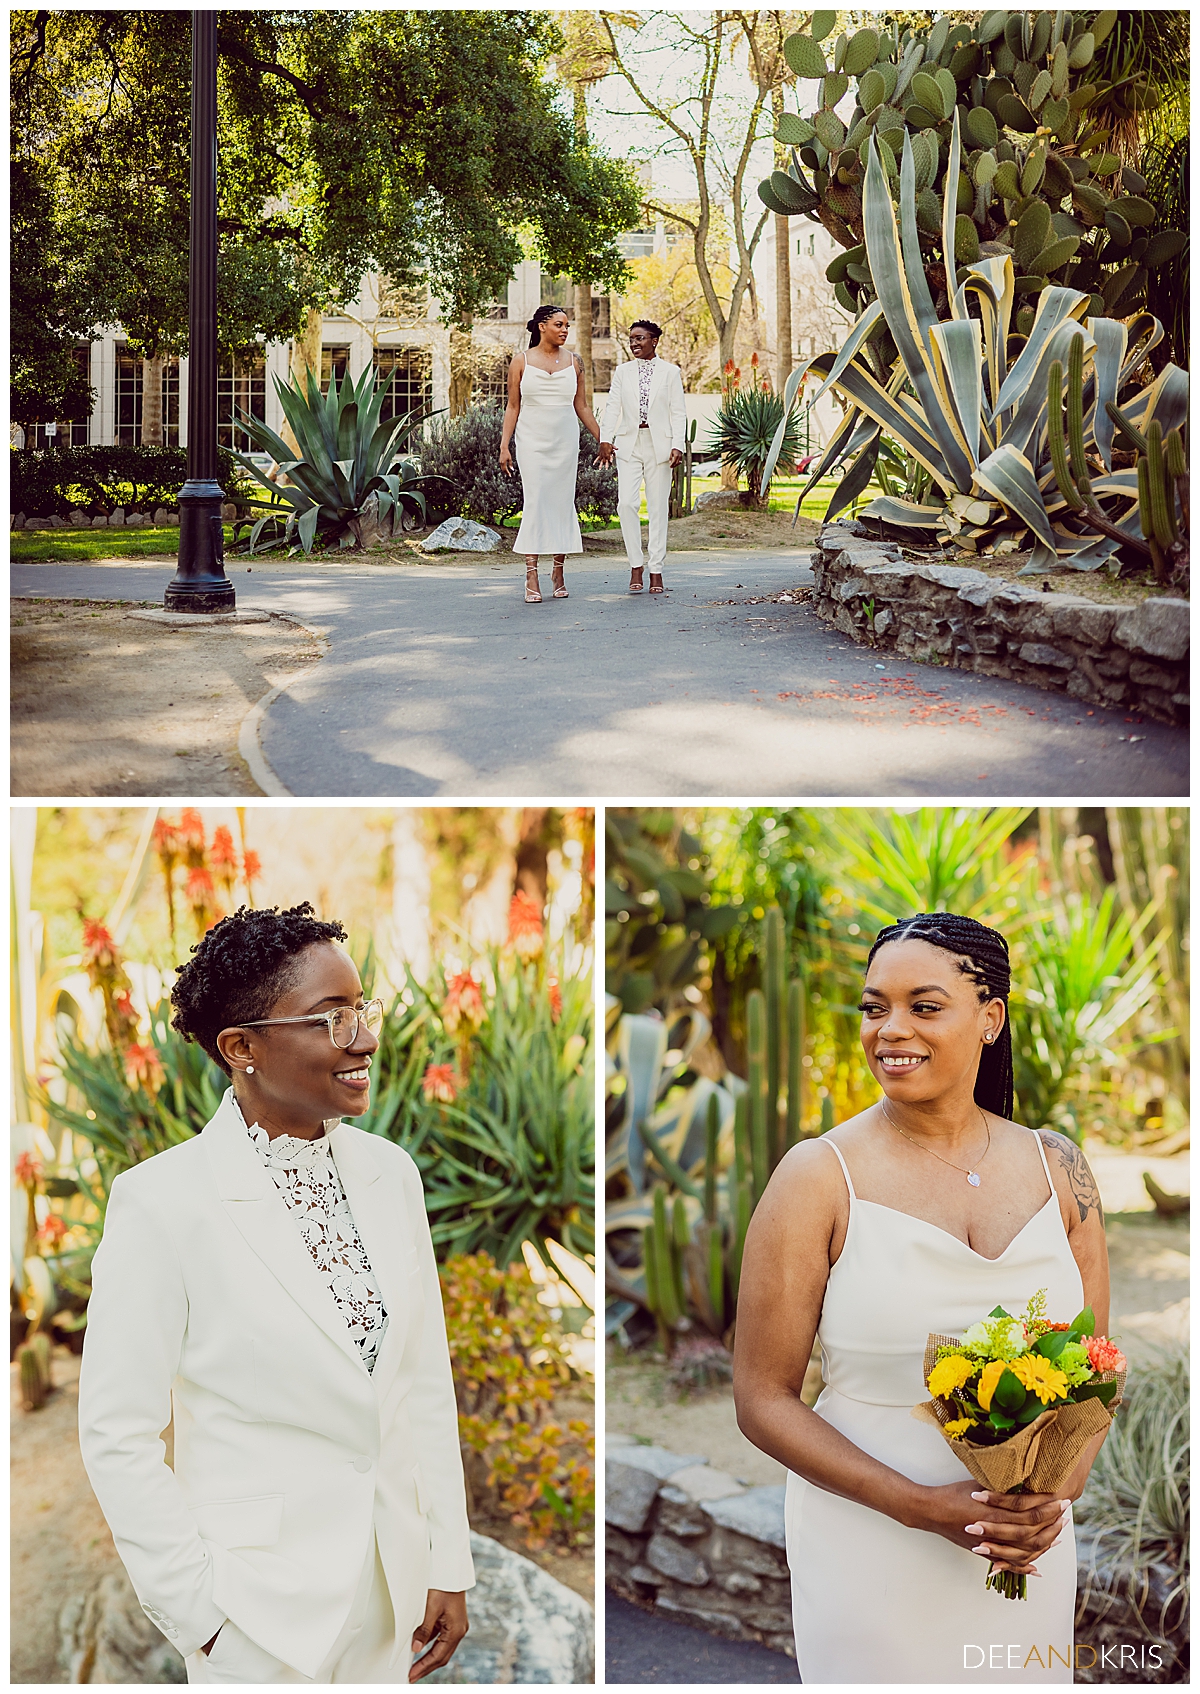 Three images: Top image of couple walking along a cement path outside the cactus garden while talking and holding hands. Bottom left image of bride in suit. Bottom right image of second bride in dress.